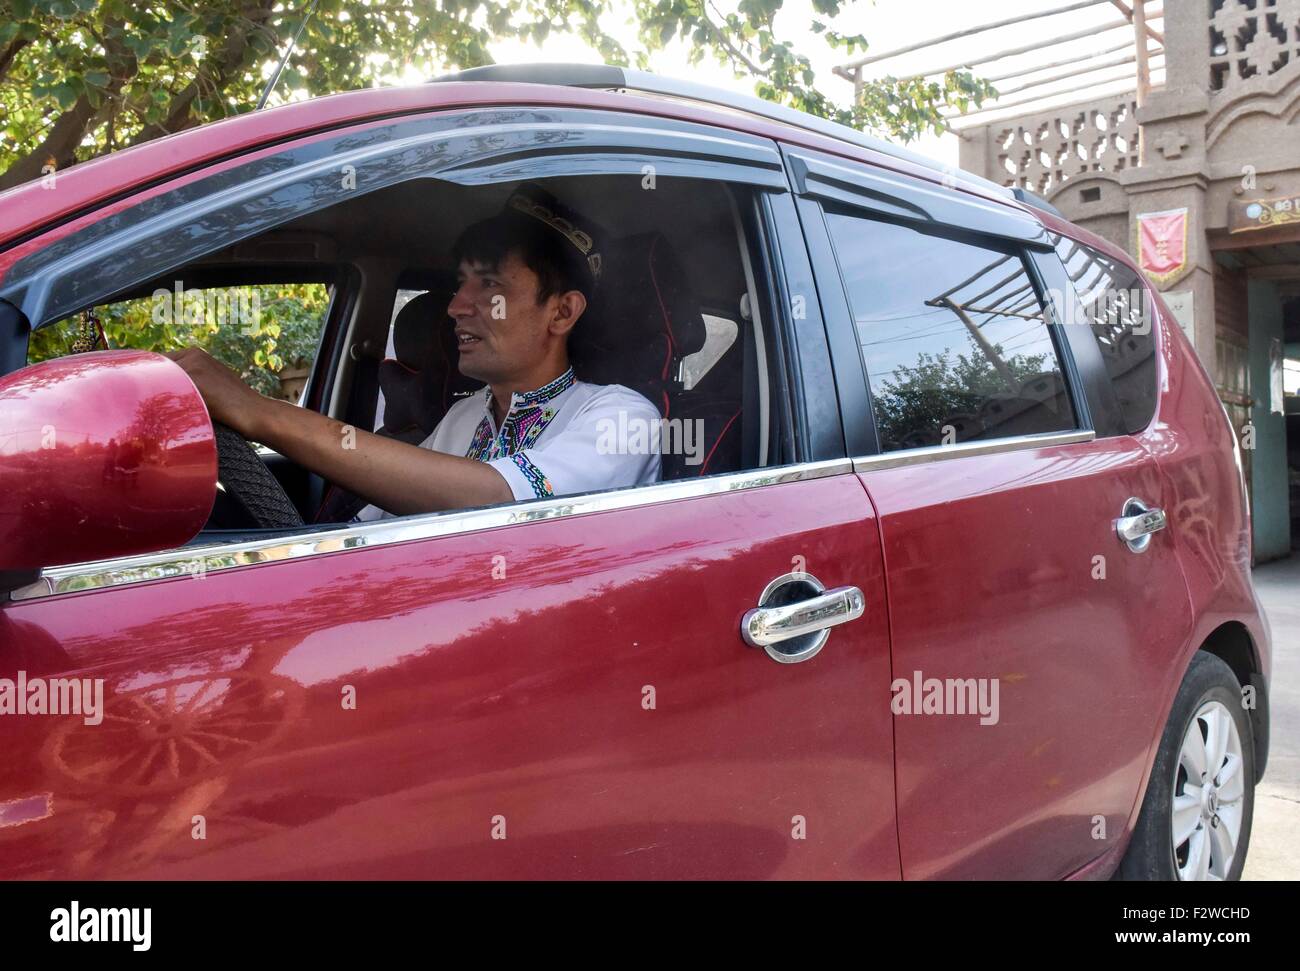 (150924) -- TURPAN, Sept. 24, 2015 (Xinhua) -- Pataer Keyimu drives his car in the Grape Valley of Turpan, northwest China's Xinjiang Uygur Autonomous Region, Sept. 6, 2015. Compared with life of his grandfather, Pataer leads a new way of life by not only growing and selling grapes, but also tourism and other business thanks to the internet. In 2010, Pataer started a family stay business and sold local products, such as dried grapes, to attract tourists. This year, he estimates that the yearly earnings would reach 150,000 RMB yuan (about 23,505 US dollars). As the 3G service provided by China  Stock Photo